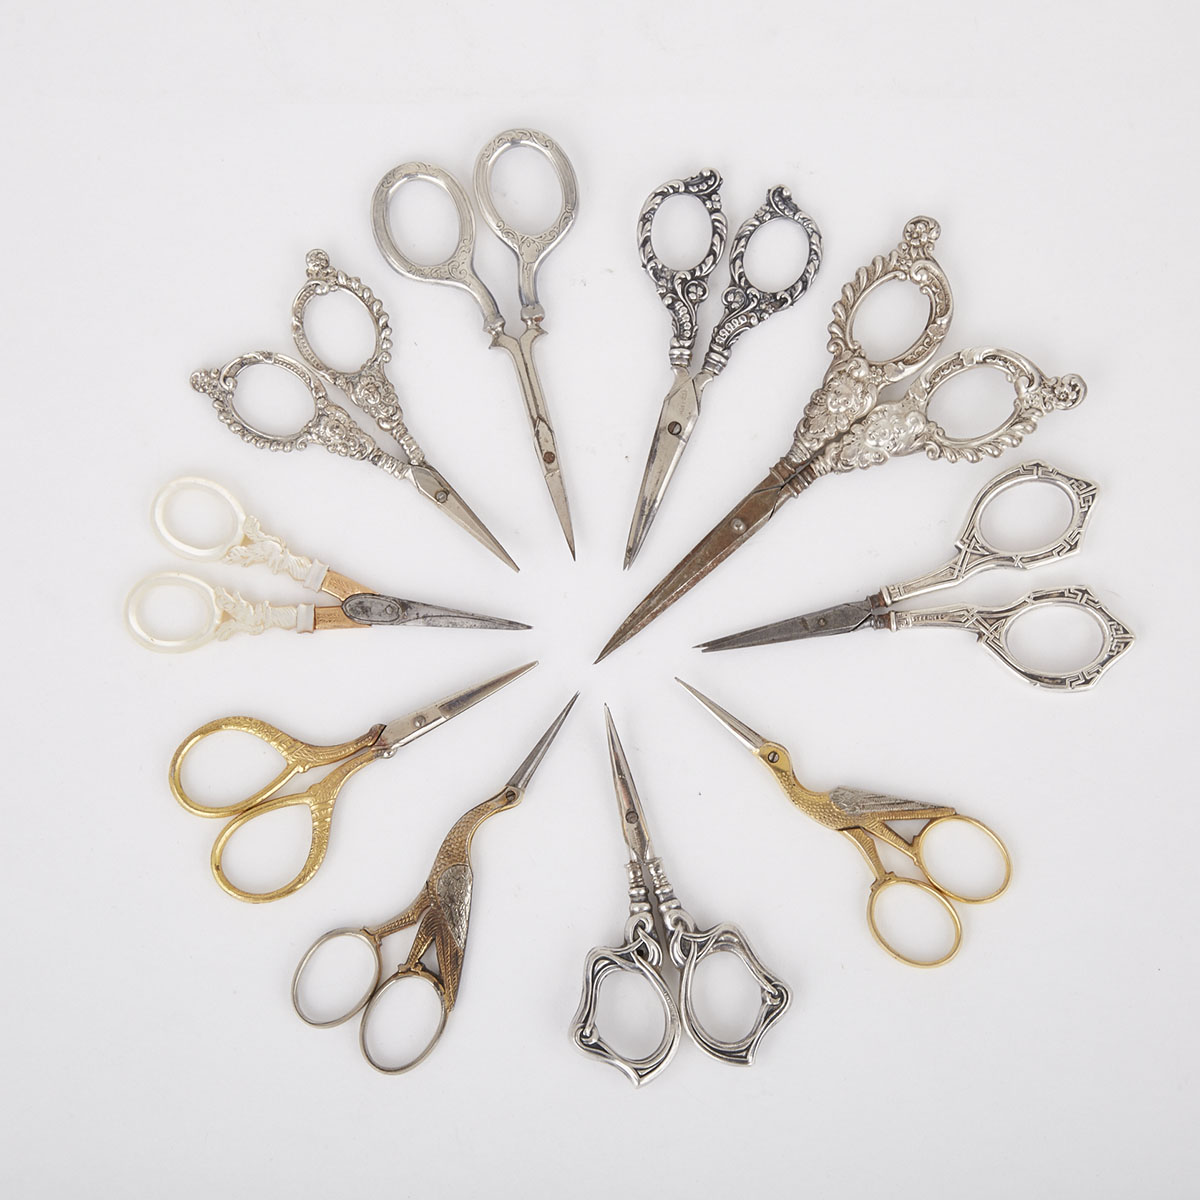 Ten Pairs Victorian and Later Sewing Scissors, 19th/early 20th centuries